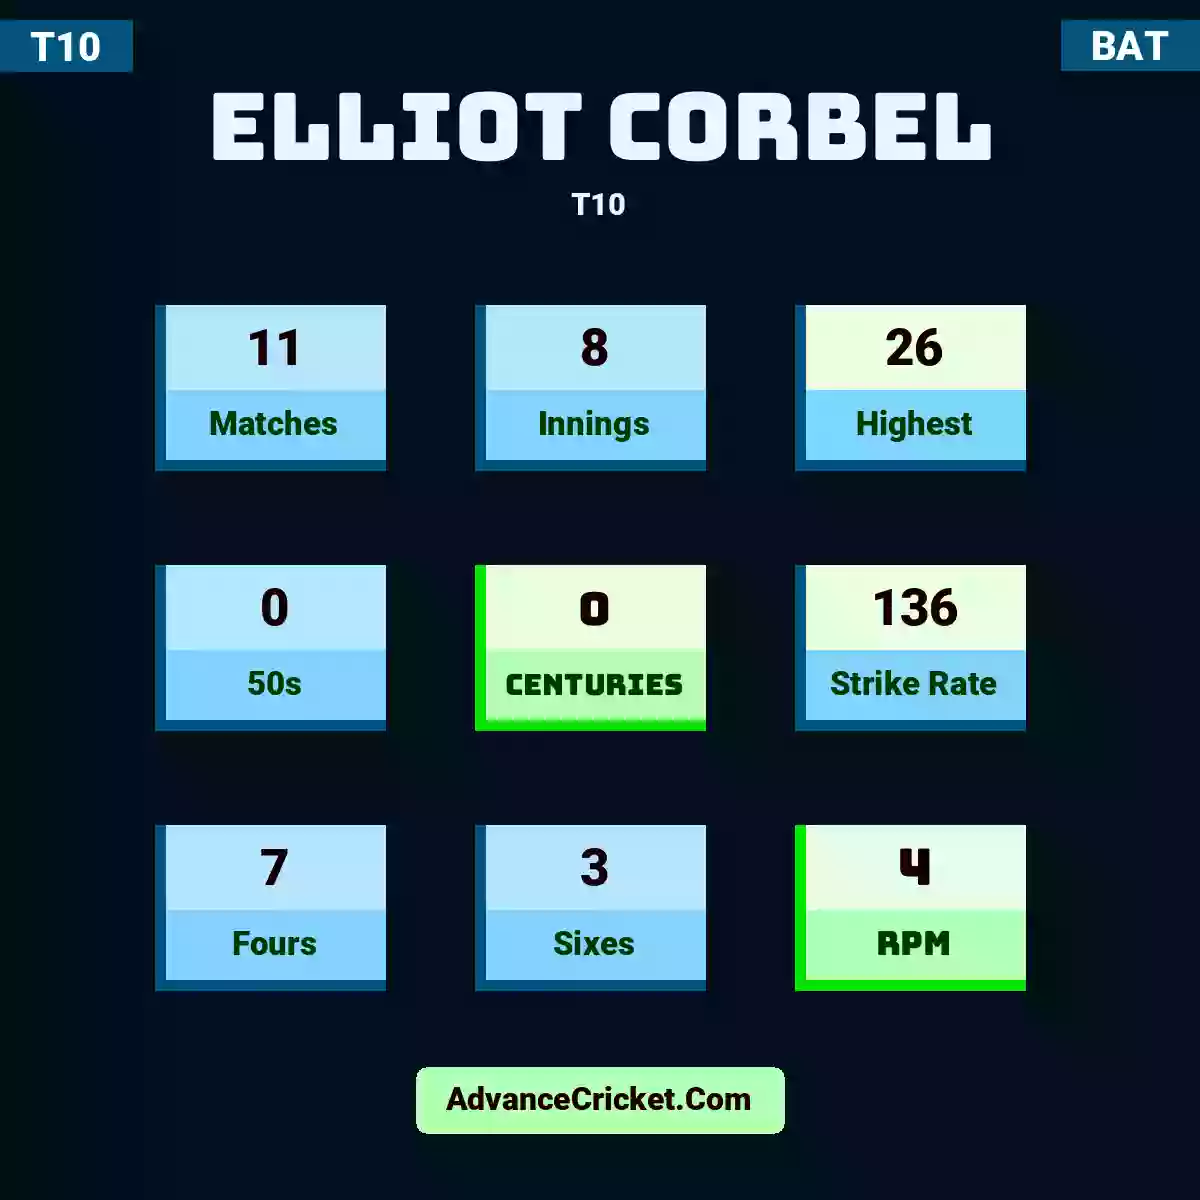 Elliot Corbel T10 , Elliot Corbel played 11 matches, scored 26 runs as highest, 0 half-centuries, and 0 centuries, with a strike rate of 136. E.Corbel hit 7 fours and 3 sixes, with an RPM of 4.